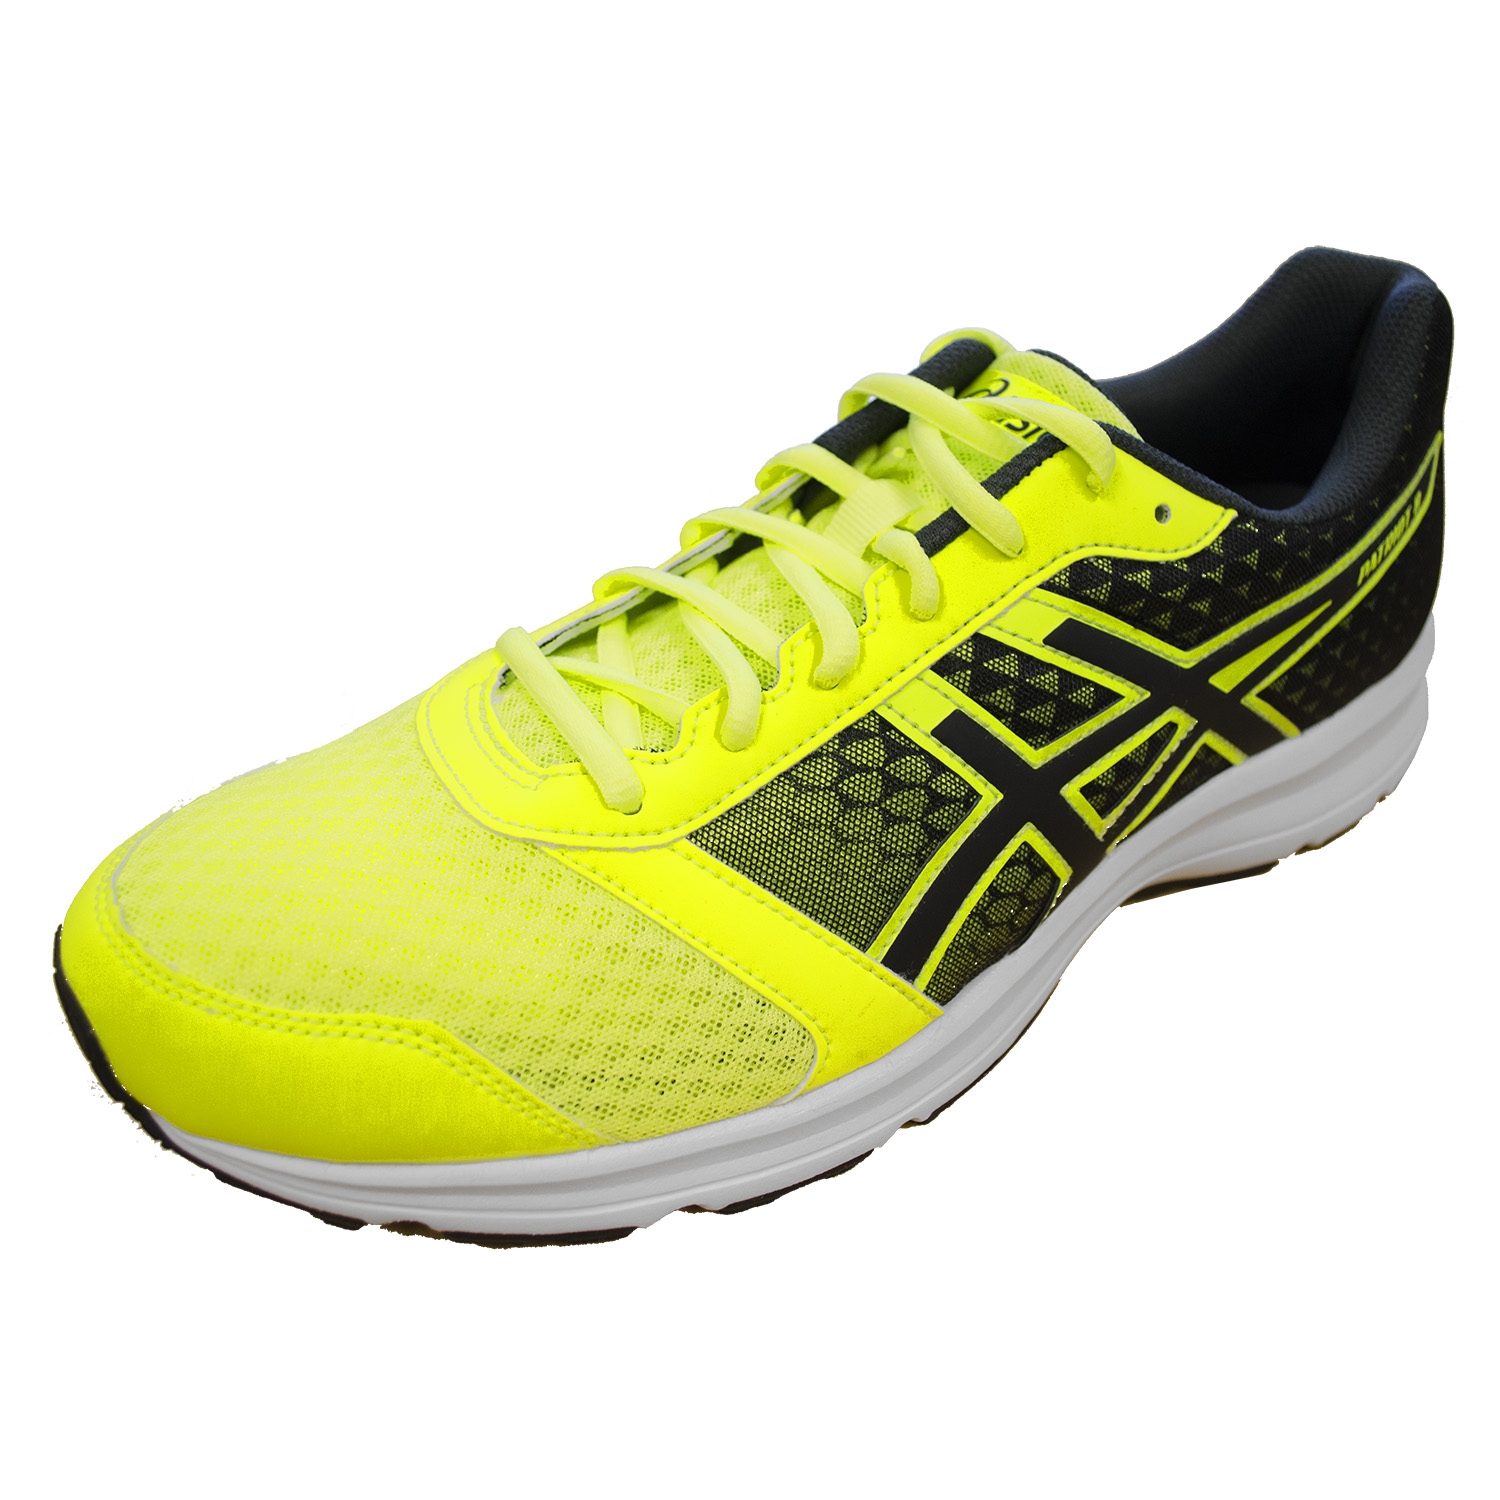 8 running shoes yel/blk